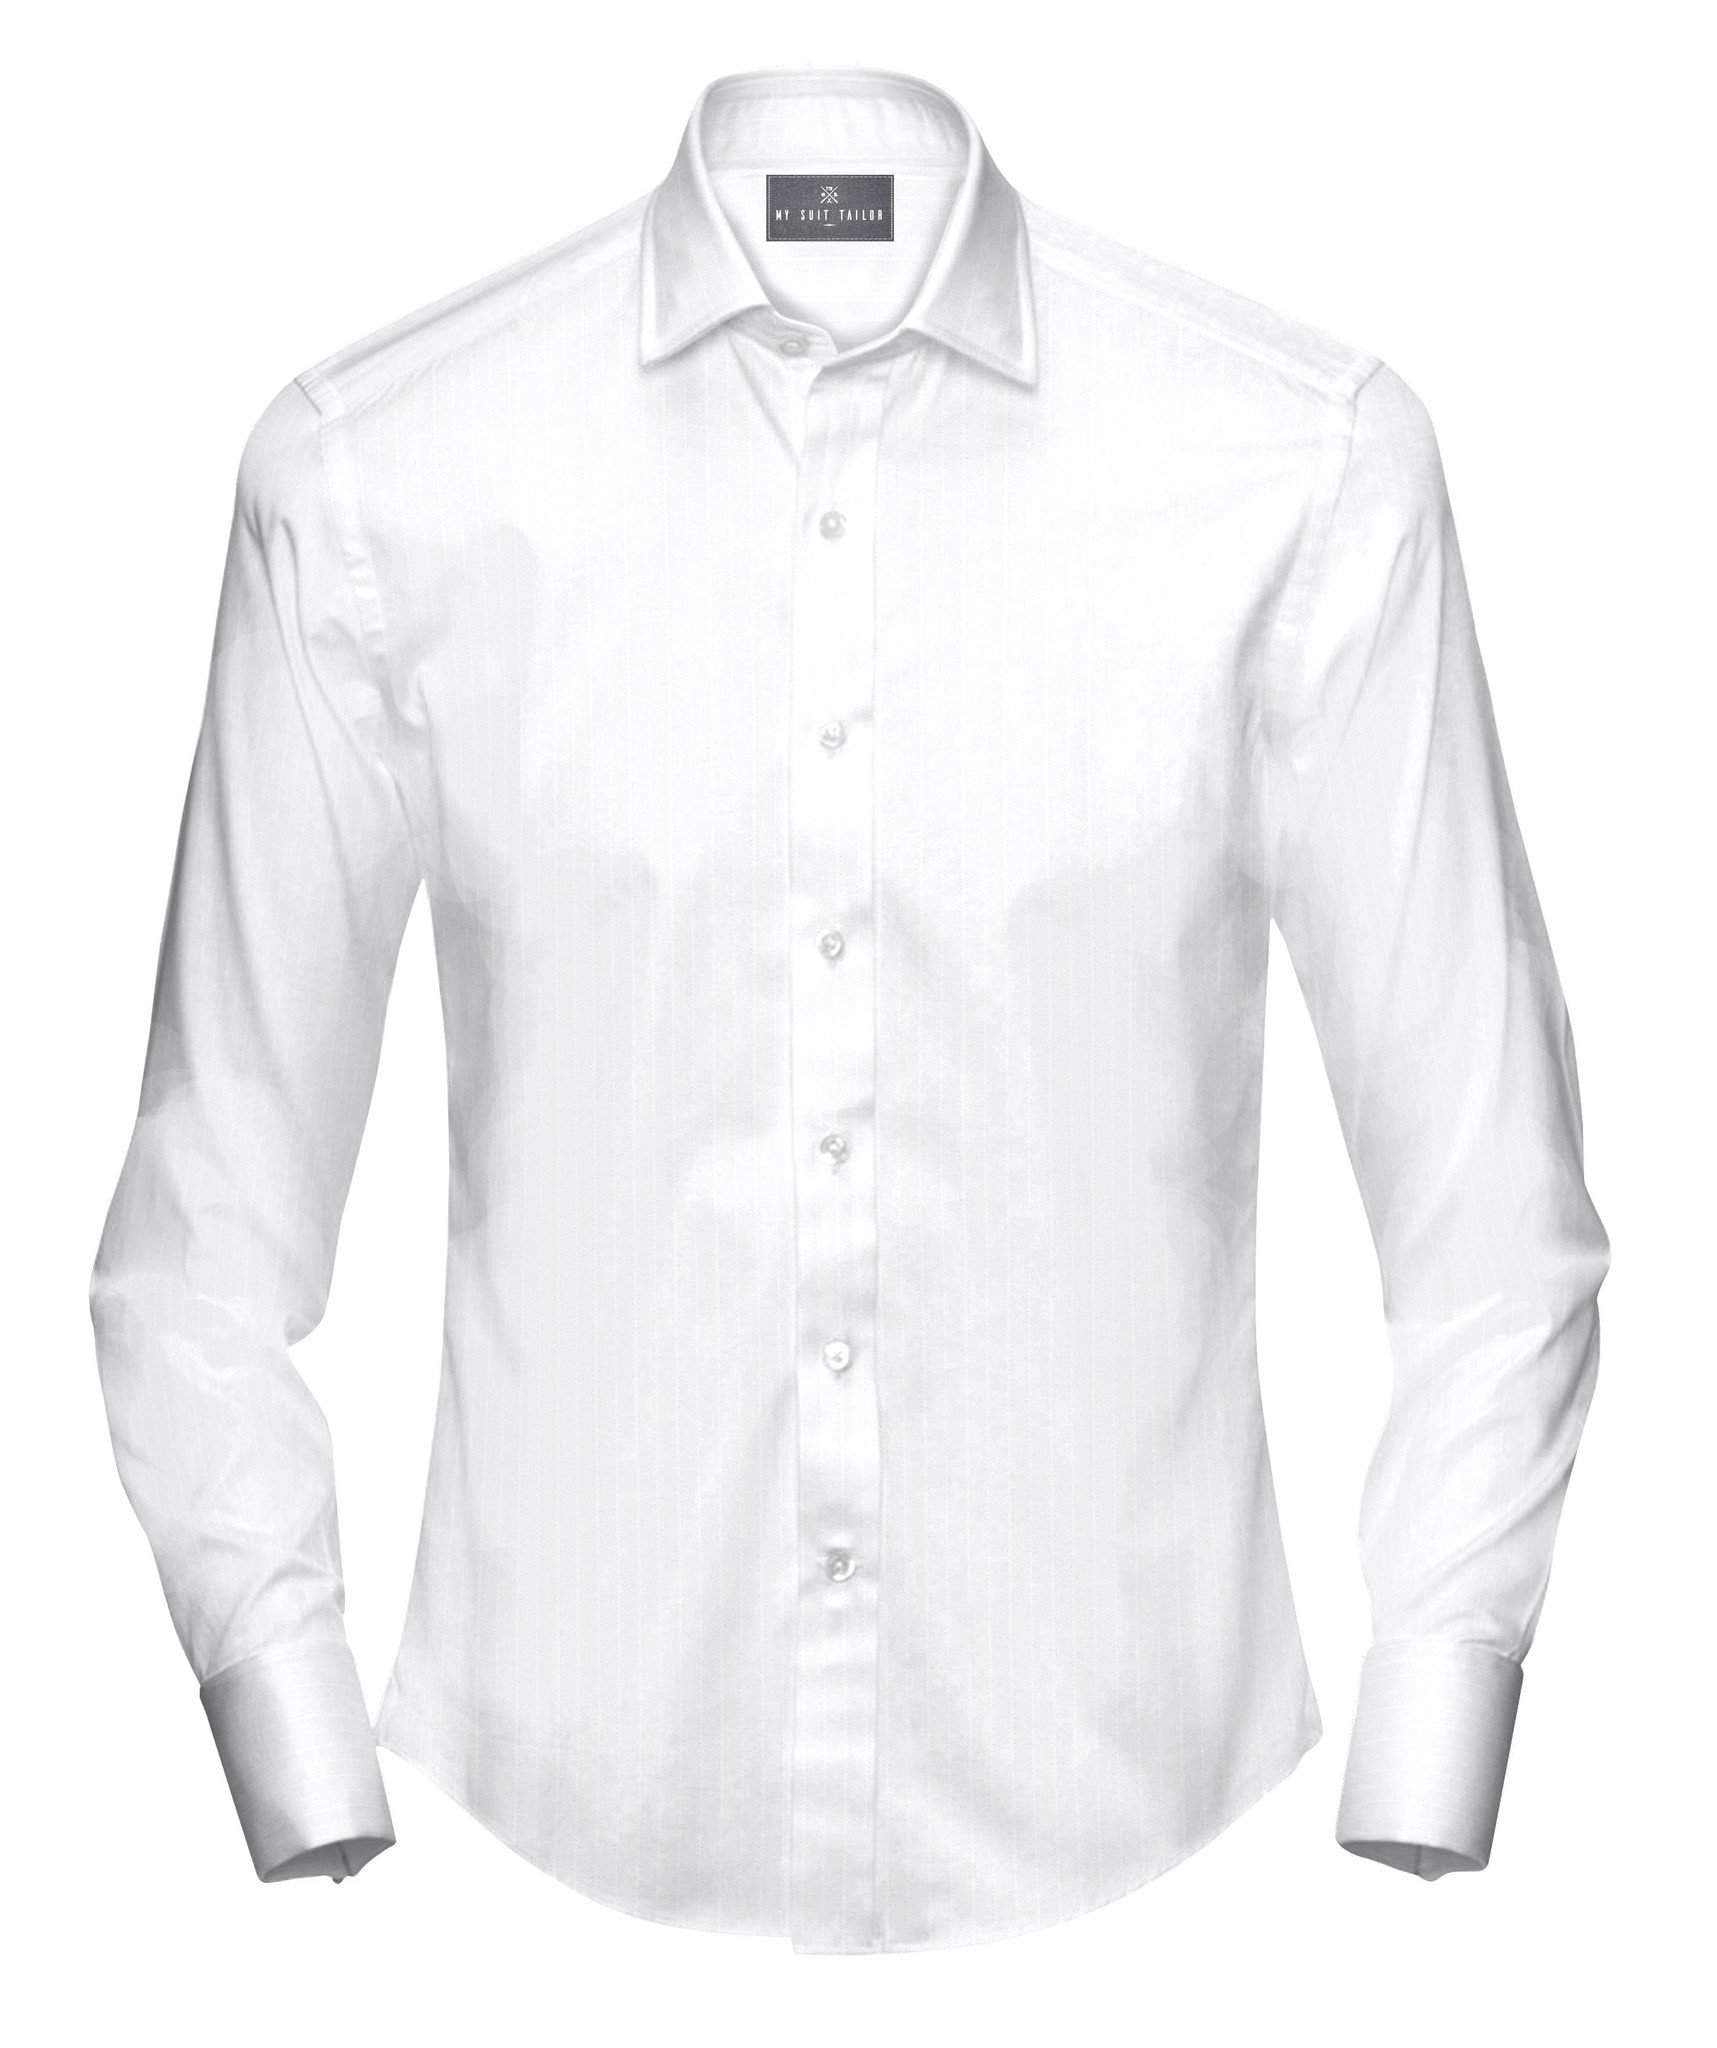 Tailored Shirts for Men: Buy Egyptian Cotton Shirt